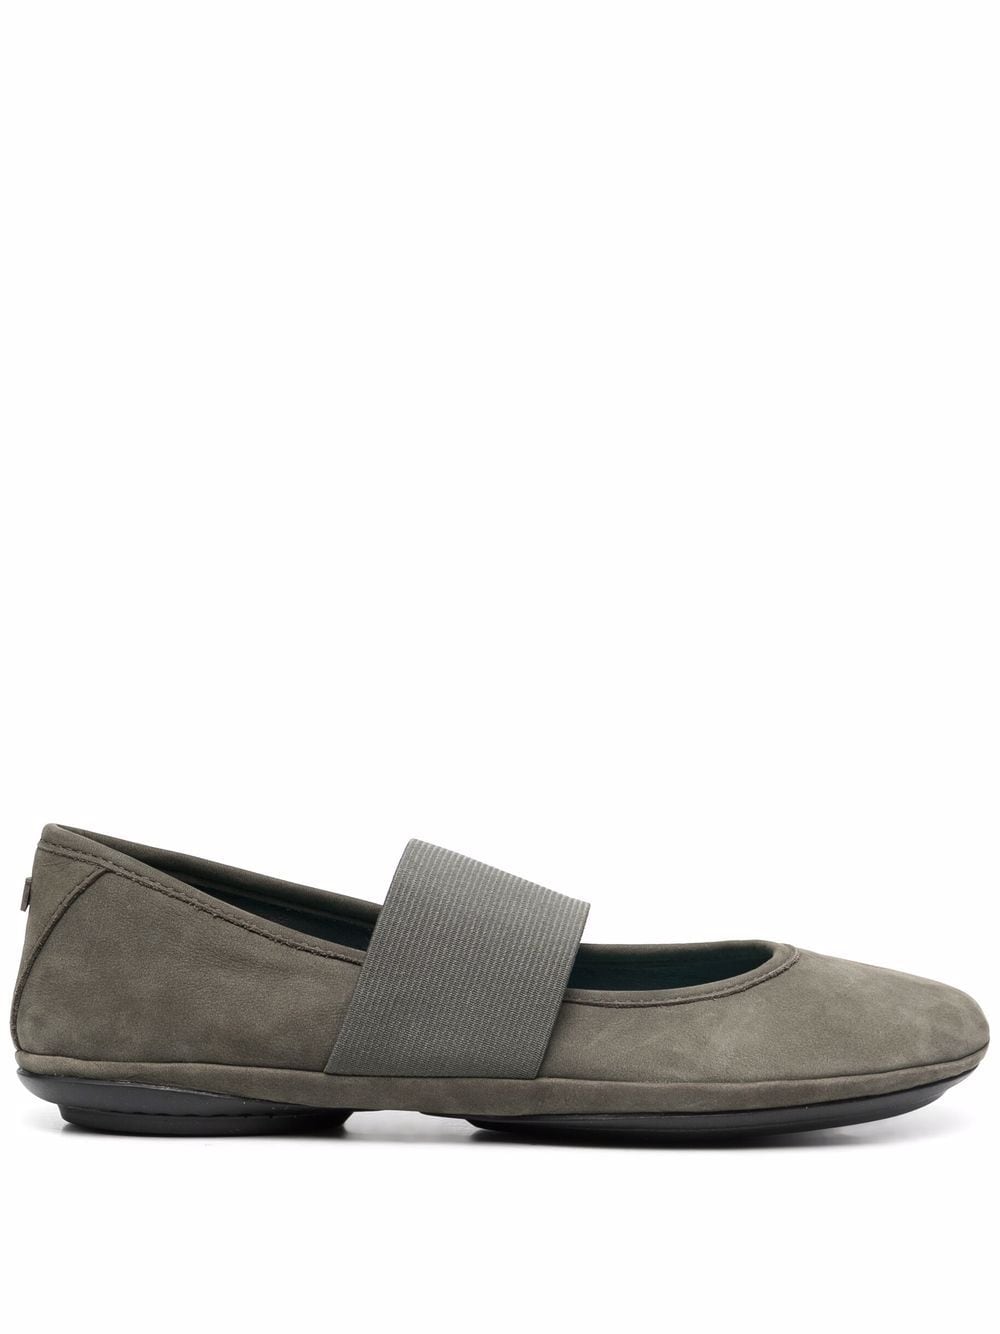 Camper green slip-on ballerina shoes for women | 21595C at Farfetch.com